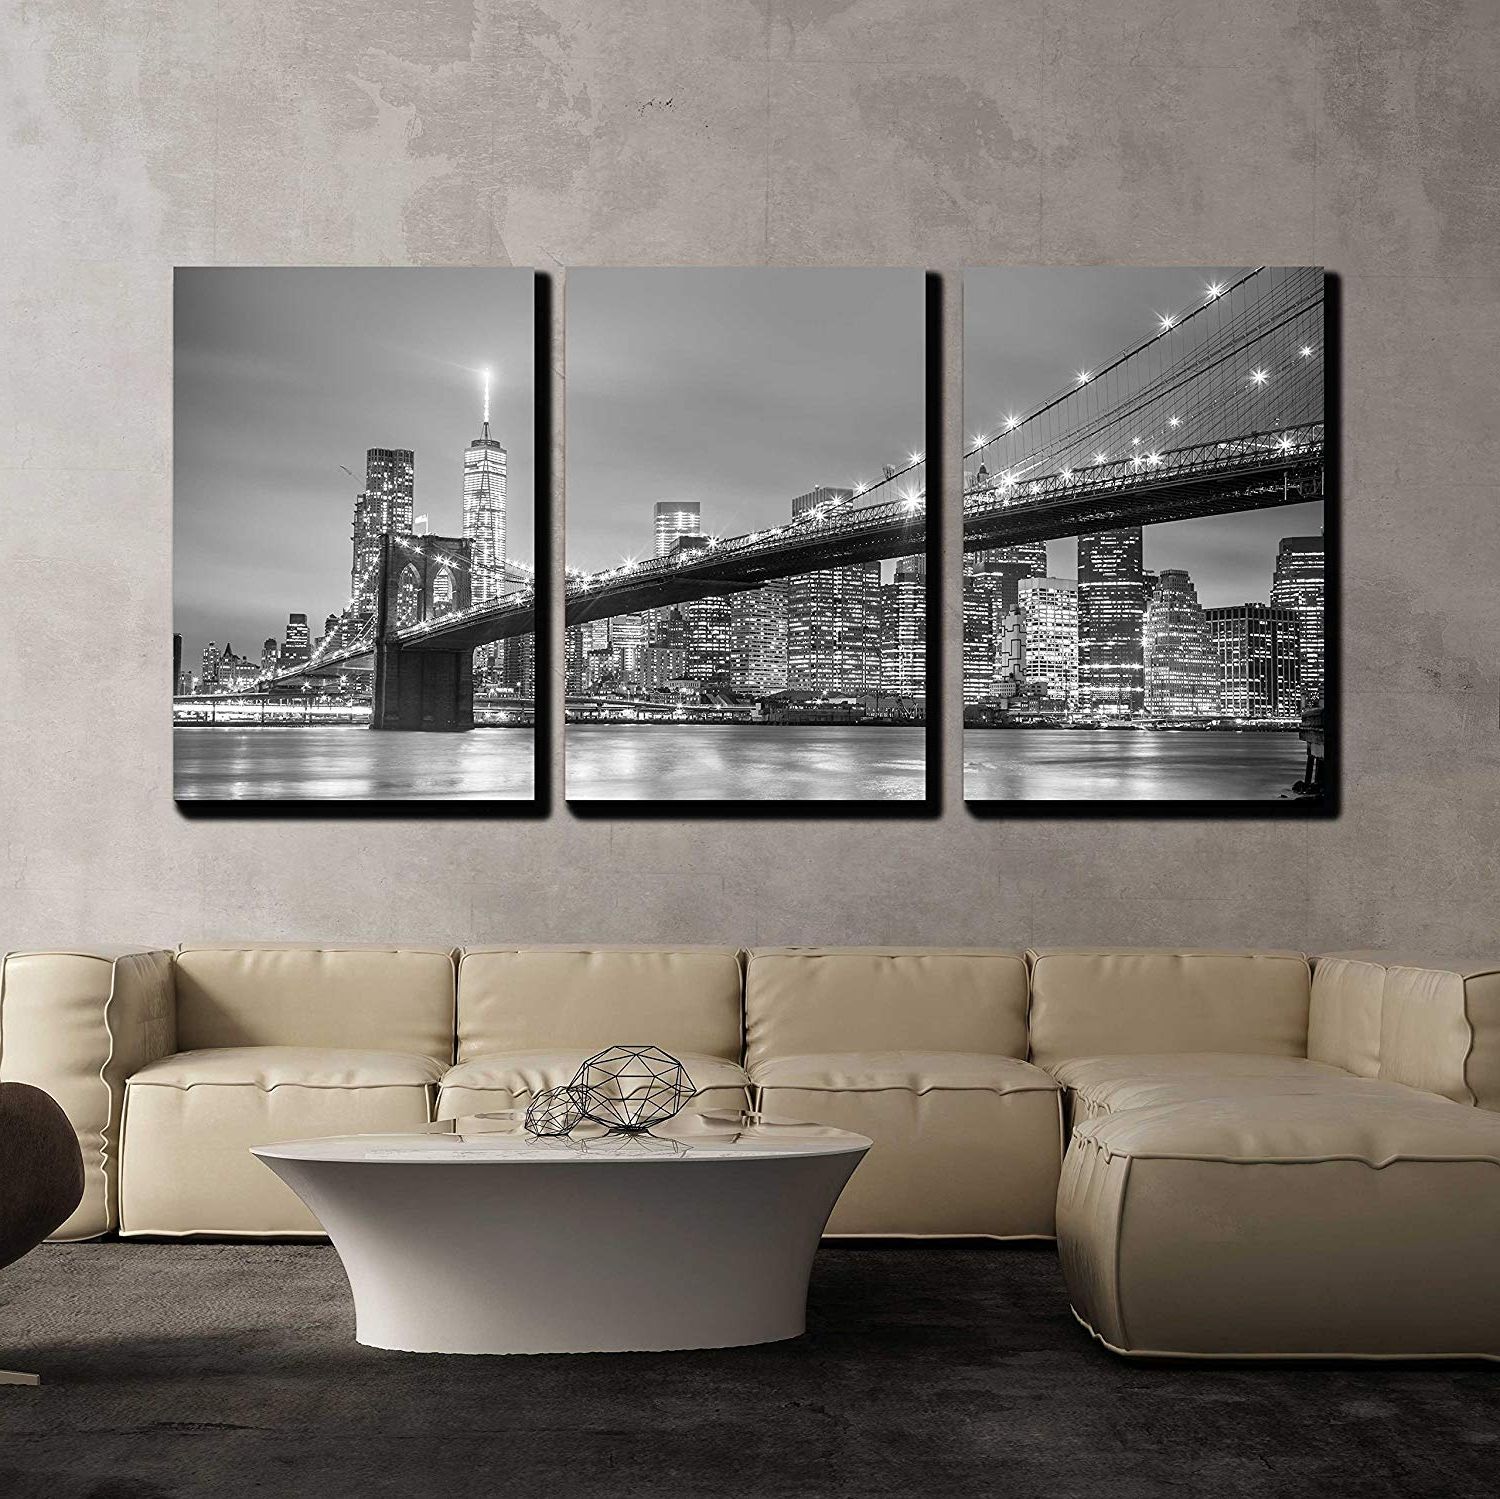 Well Liked Town Wall Art For Wall26 3 Panels Canvas Art Black And White City Landscape Prints Modern Wall  Art Decor, 24 X 36 Inch – Walmart (Photo 15 of 15)